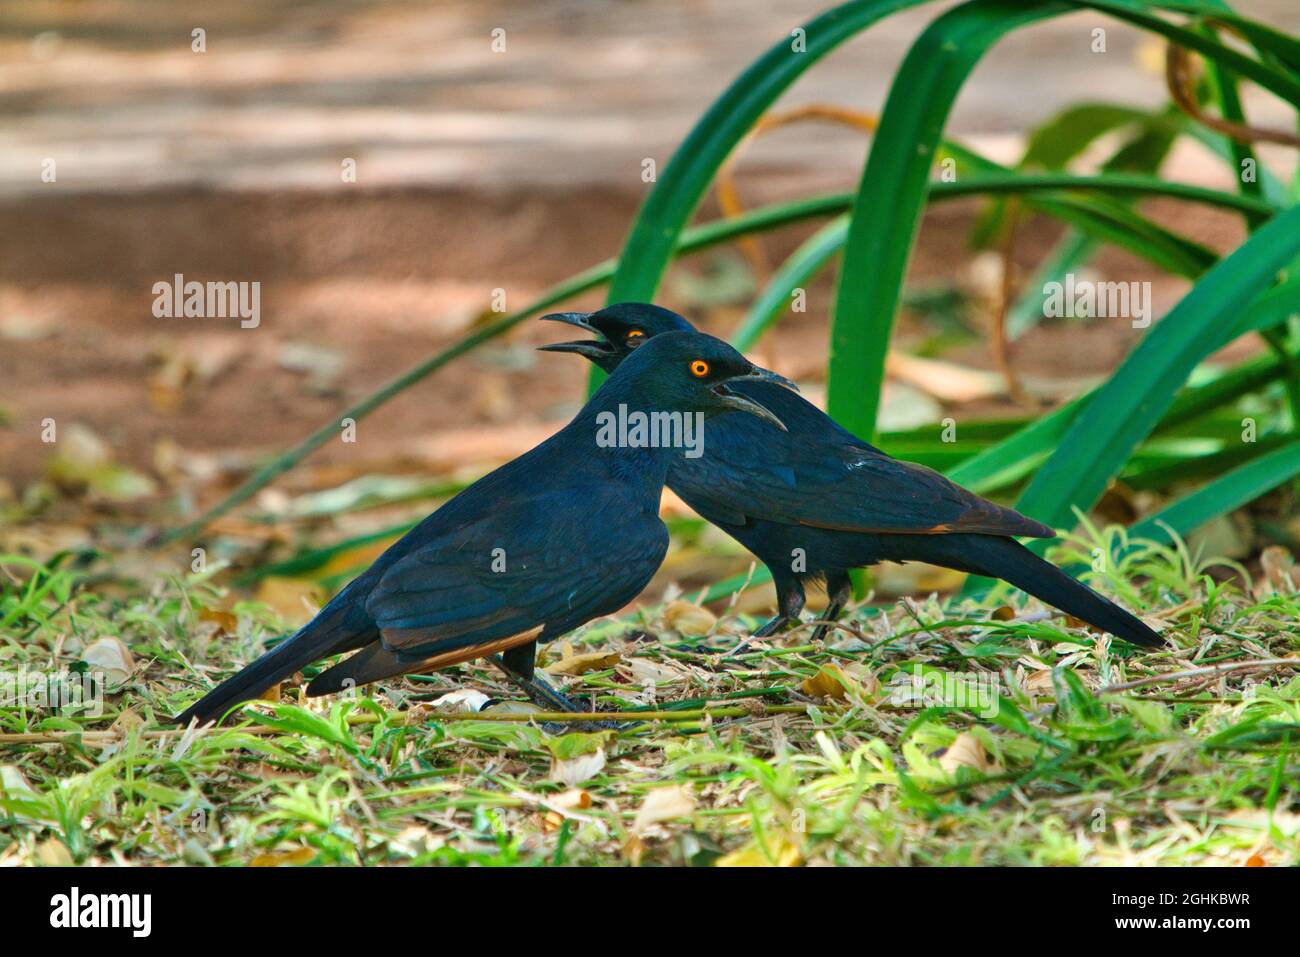 Two Pale-winged Starlings stood on the grass with their beaks open. Lifestyle of various wild animals in Etosha National Park. Namibia. South Africa. Stock Photo